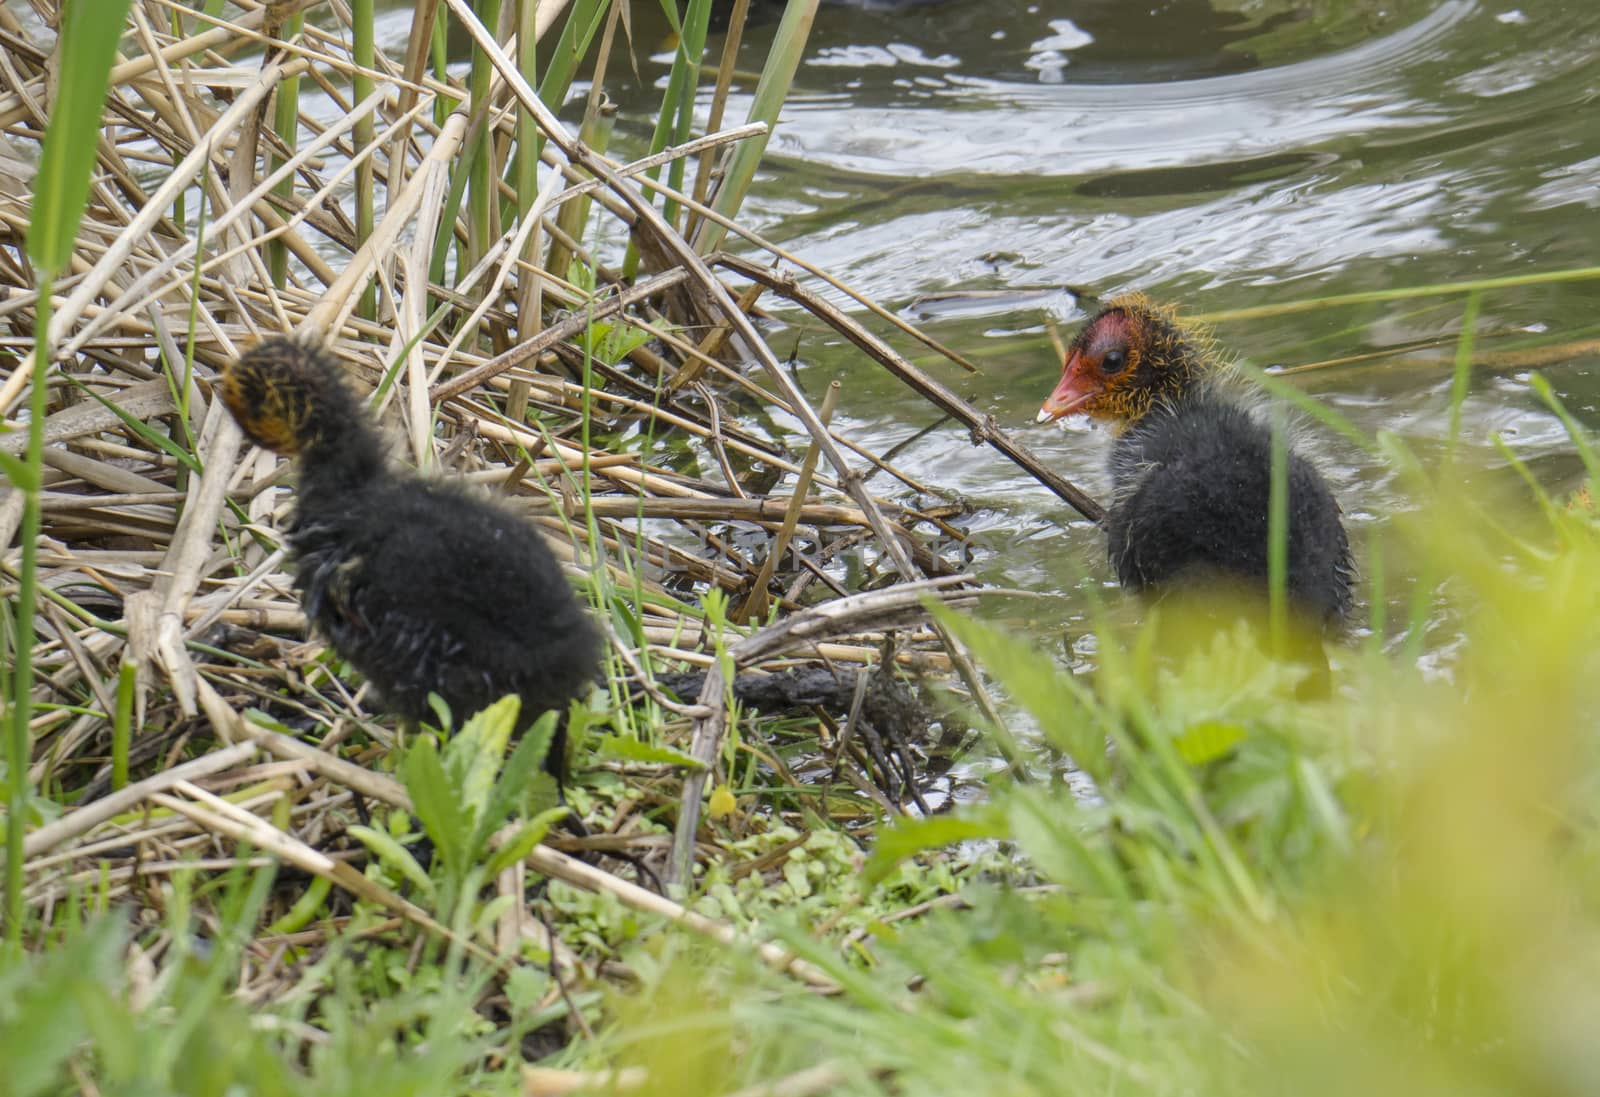 Close up portrait of two cute duclings, baby chickens of Eurasian coot Fulica atra, also known as the common coot with hiding in reeds of green pond water, selective focus by Henkeova